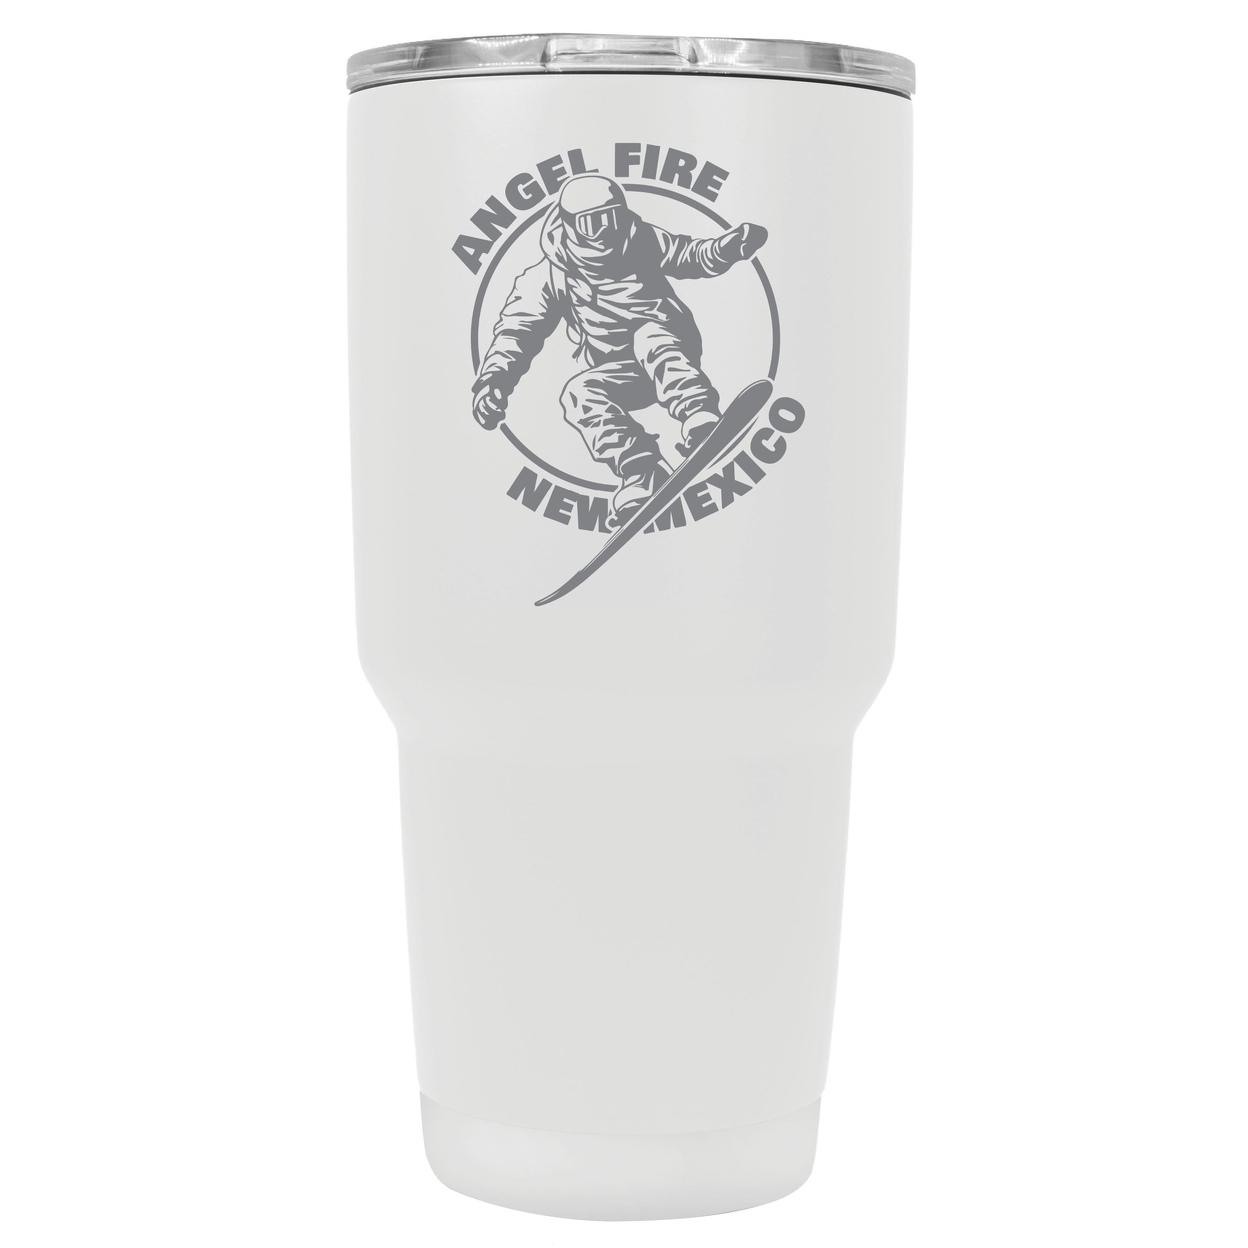 Angel Fire New Mexico Souvenir 24 Oz Engraved Insulated Stainless Steel Tumbler - Black,,4-Pack